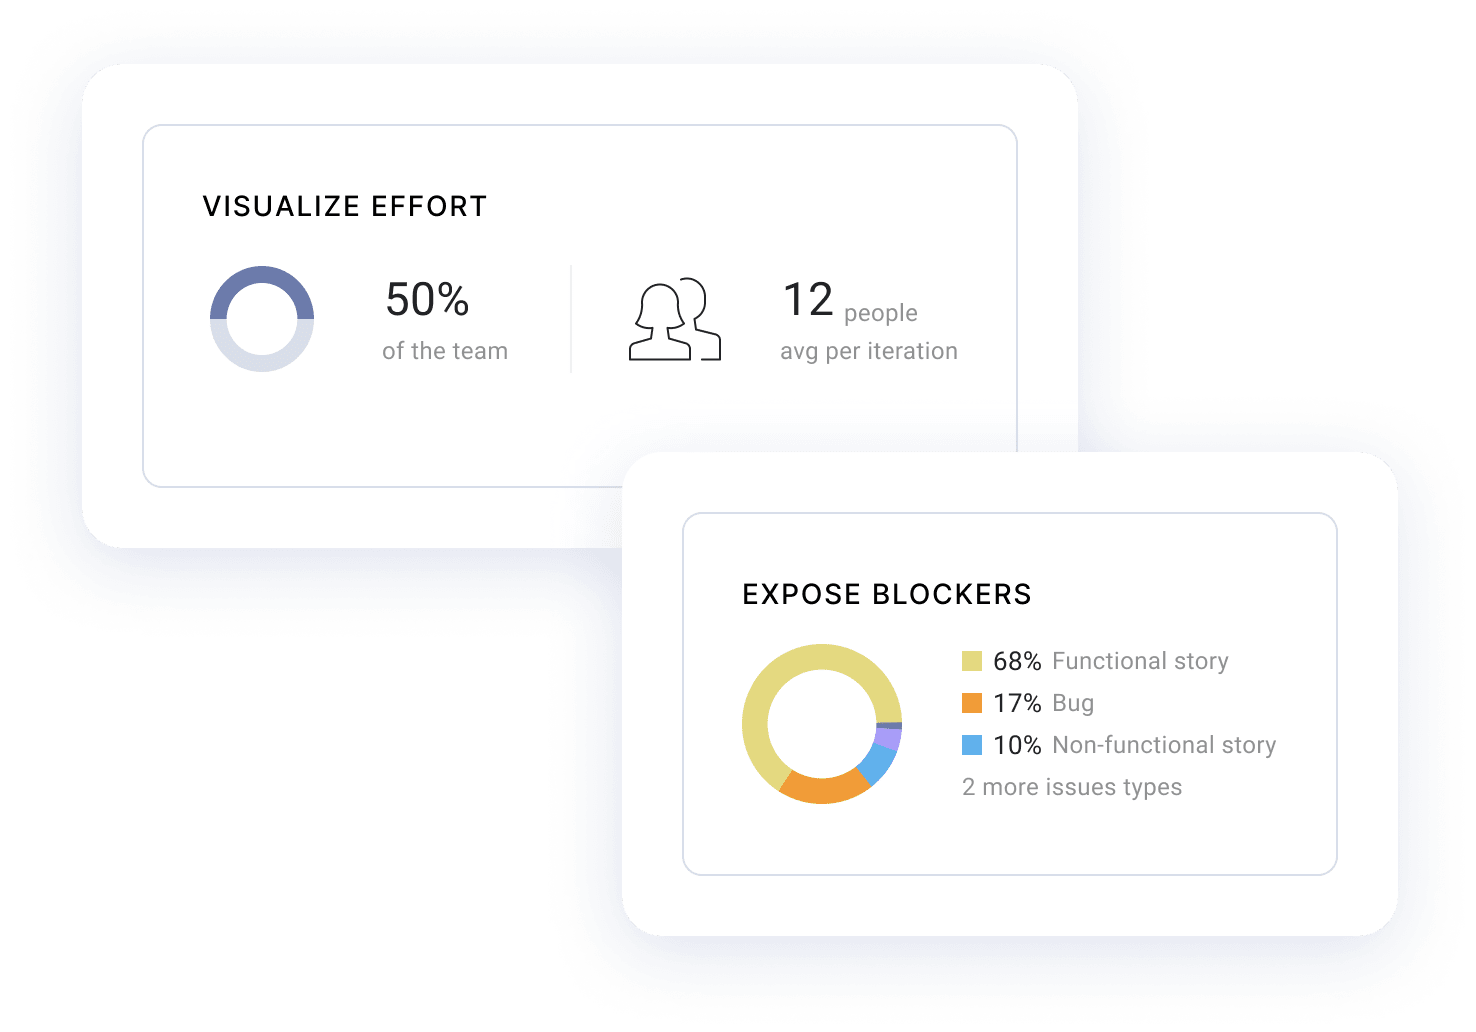 LinearB Visualize Effort and Expose Blockers Metrics